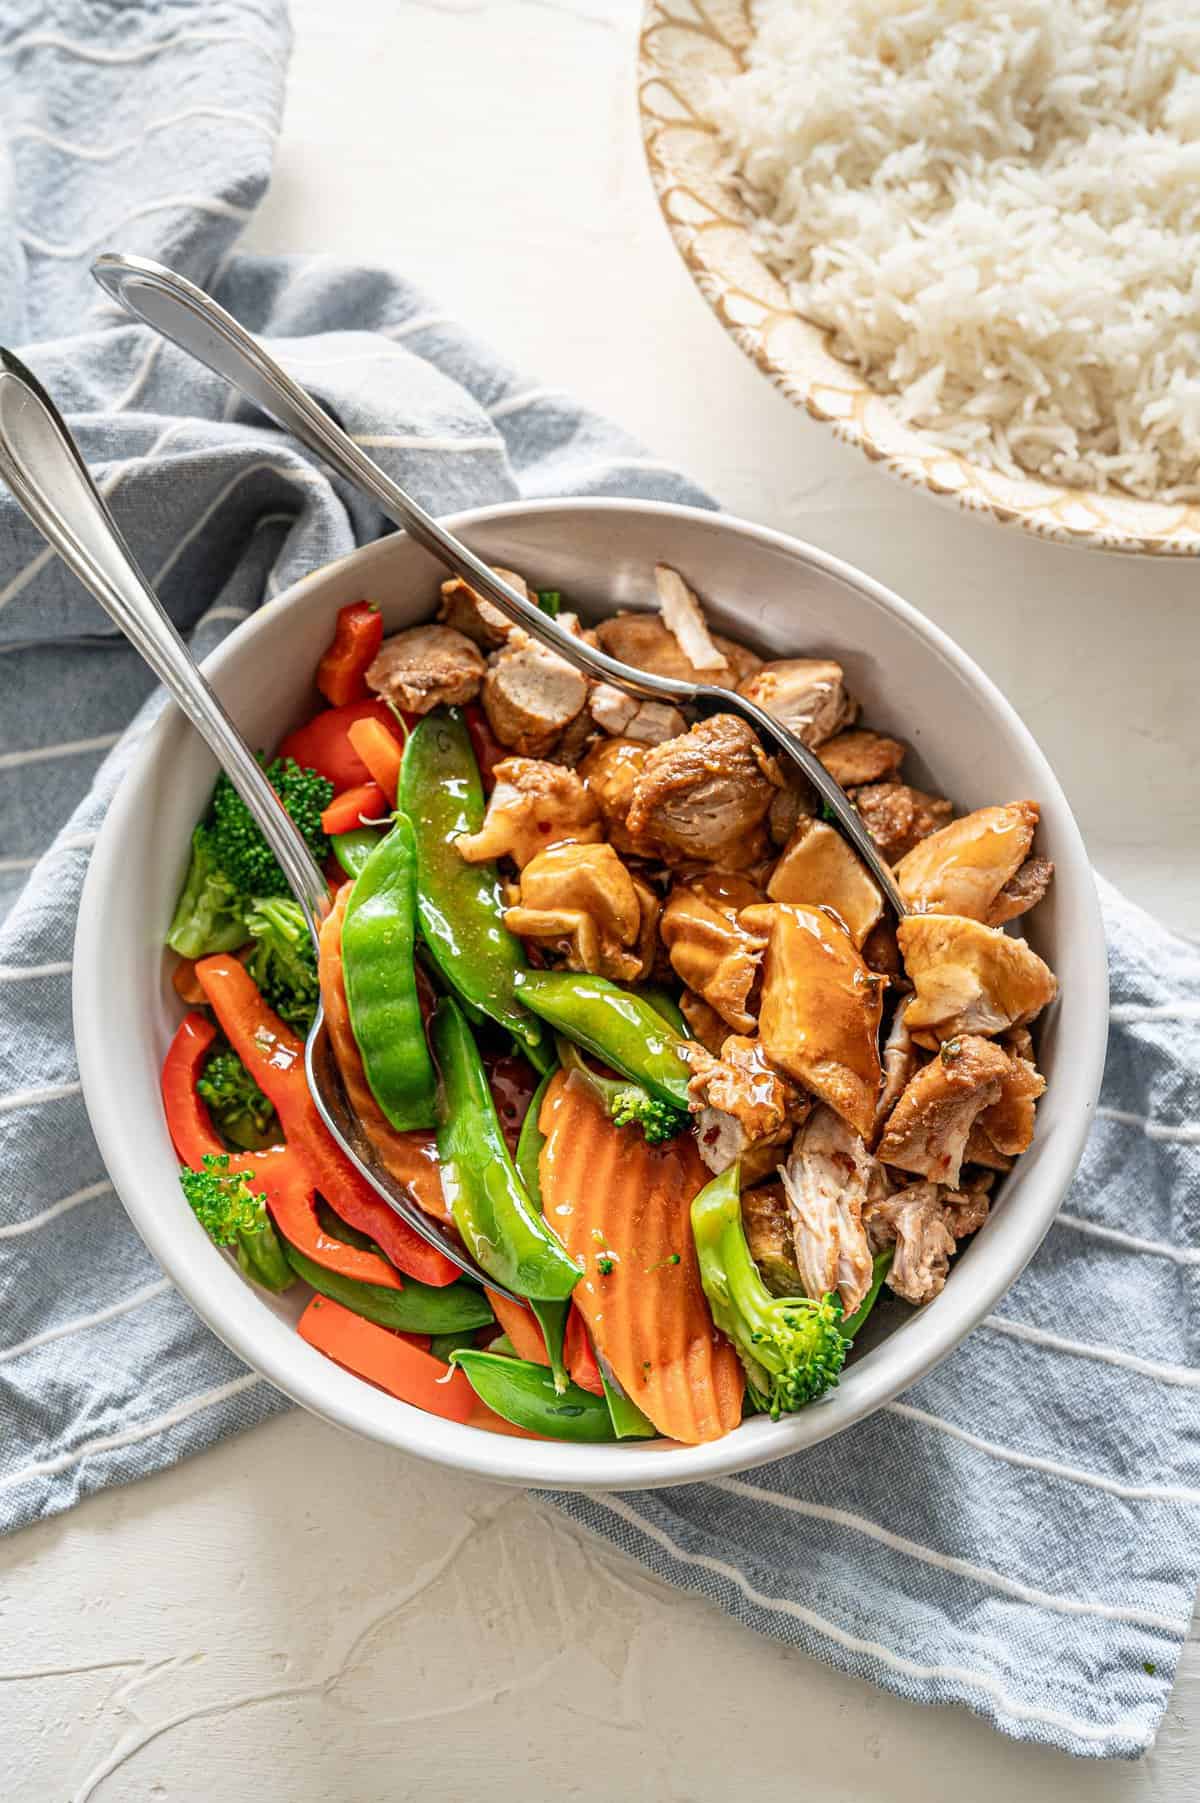 Honey bourbon chicken in a bowl with stir-fry veggies covered in sauce.